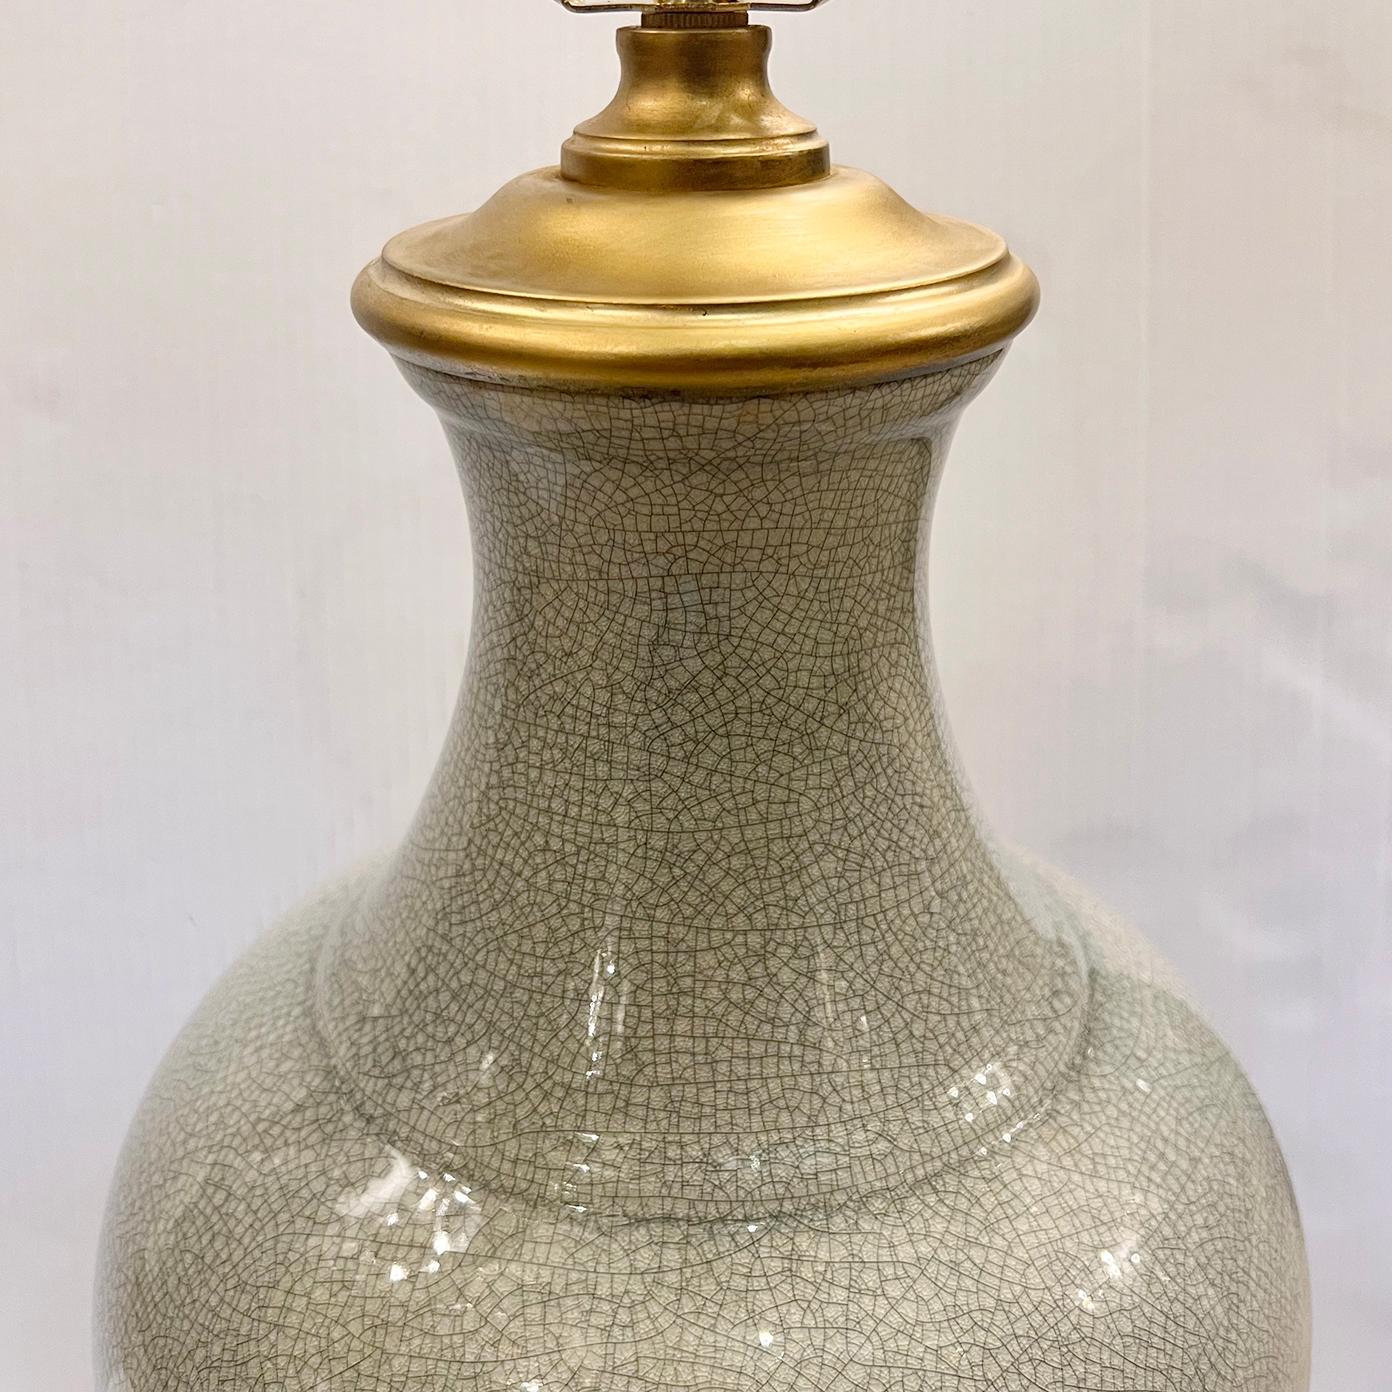 A circa 1960's Italian crackled porcelain table lamp with gilt base.

Measurements:
Height of body: 20